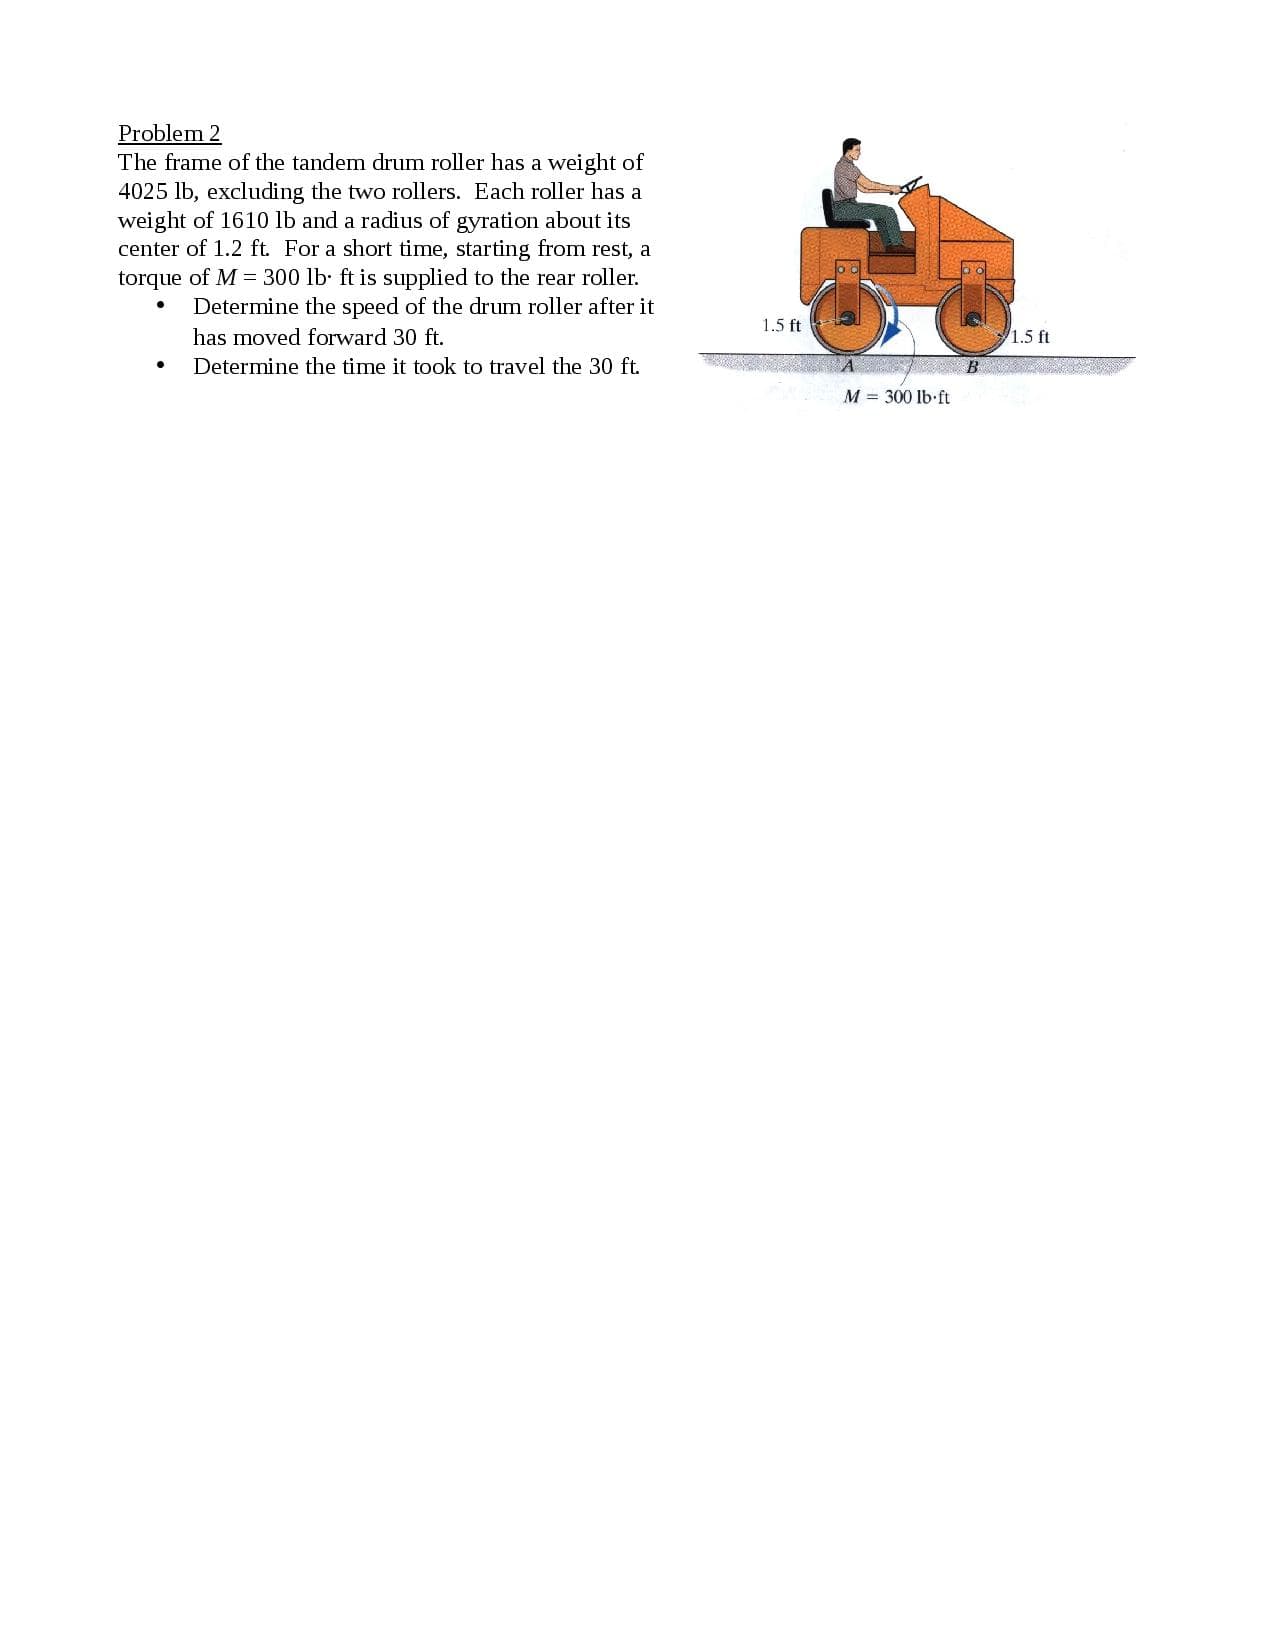 Problem 2
The frame of the tandem drum roller has a weight of
4025 lb, excluding the two rollers. Each roller has a
weight of 1610 lb and a radius of gyration about its
center of 1.2 ft For a short time, starting from rest, a
torque of M = 300 lb- ft is supplied to the rear roller.
Determine the speed of the drum roller after it
has moved forward 30 ft.
Determine the time it took to travel the 30 ft.
1.5 ft
1.5 ft
M = 300 Ib-ft
